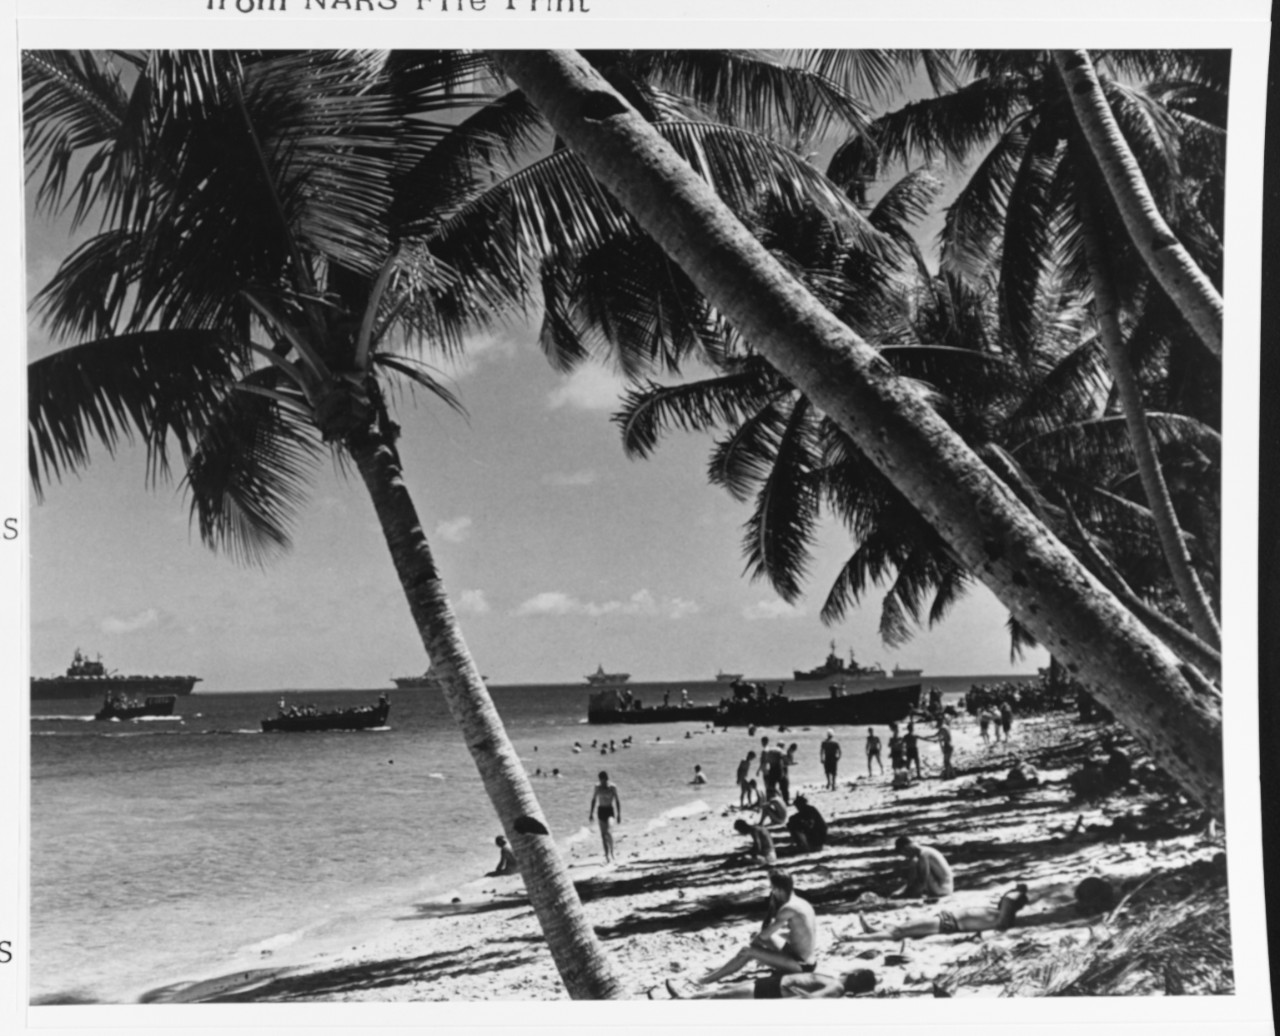 Men swimming at the fleet recreation area, as landing craft bring other sailors ashore for liberty, circa May 1944, as the fleet prepares for the Marianas Campaign. Carrier at left is USS Enterprise (CV-6).